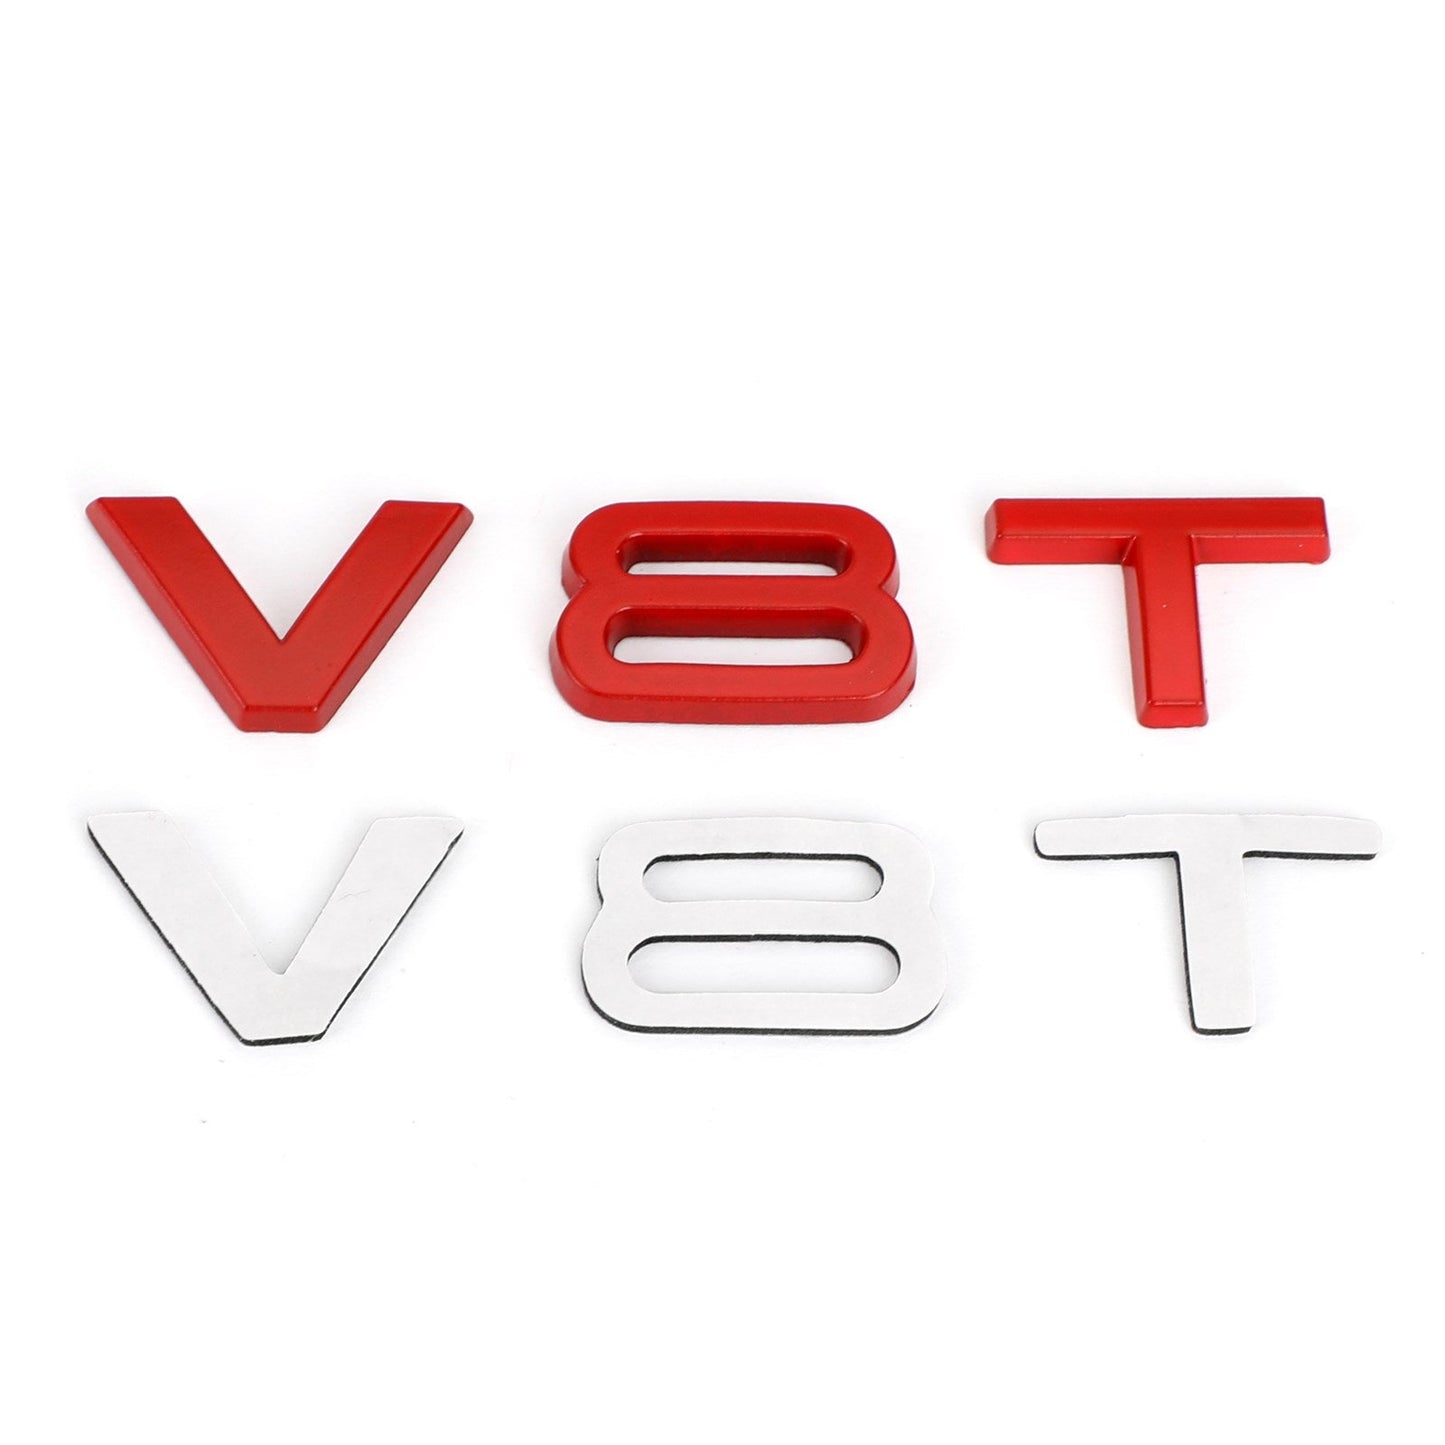 V8T Emblem Badge Fit For AUDI A1 A3 A4 A5 A6 A7 Q3 Q5 Q7 S6 S7 S8 S4 SQ5 Red